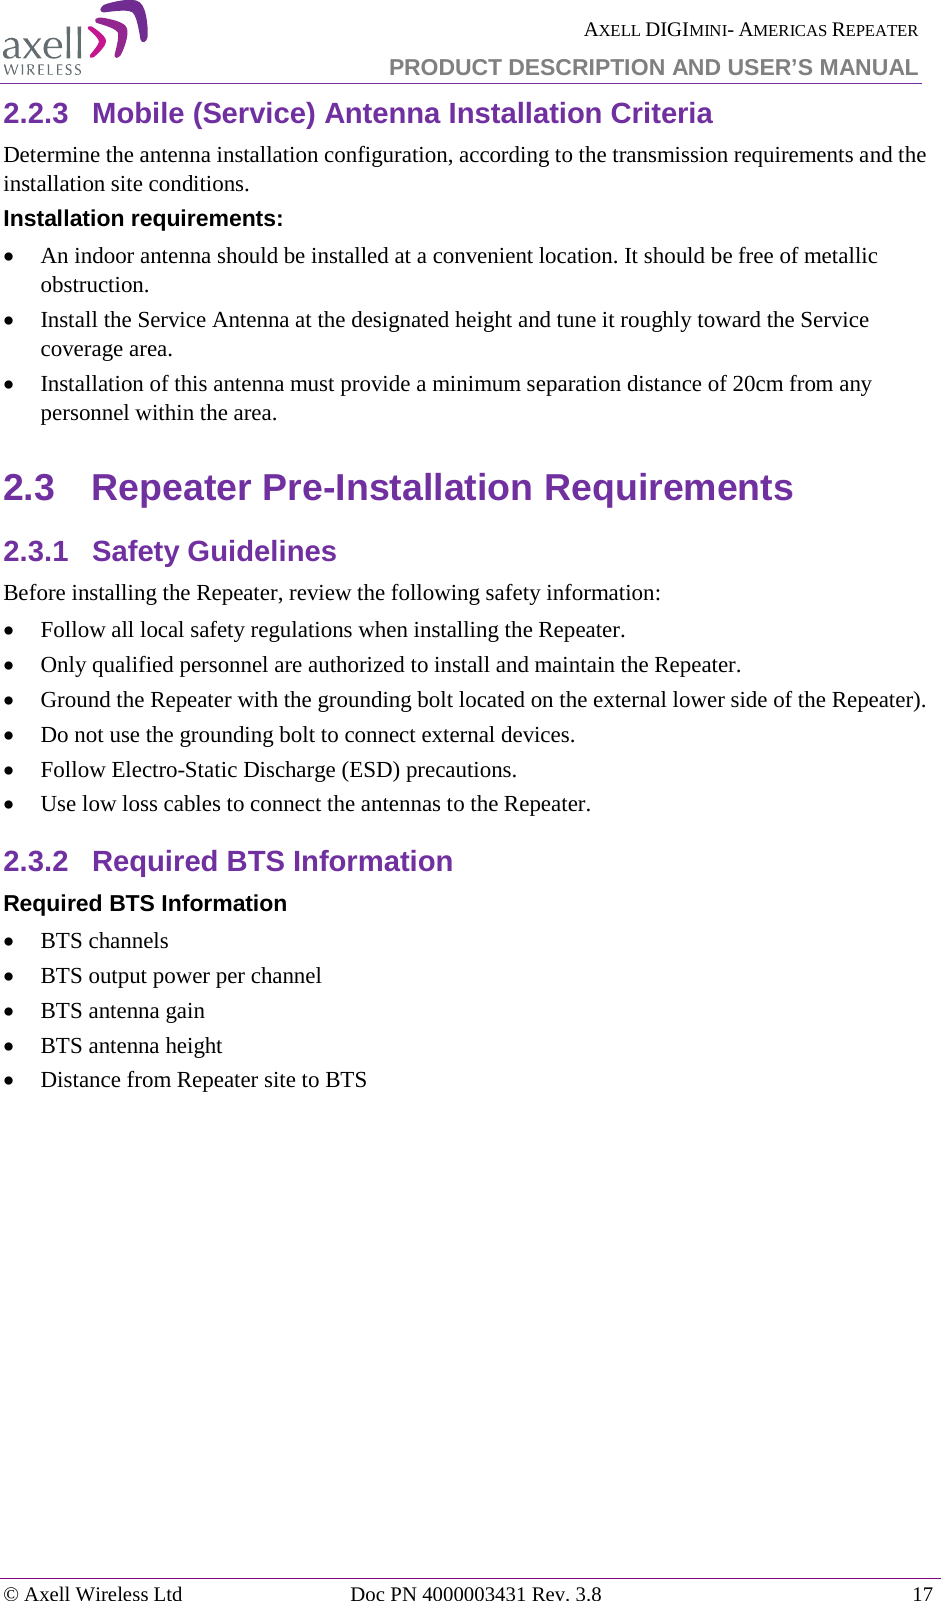  AXELL DIGIMINI- AMERICAS REPEATER PRODUCT DESCRIPTION AND USER’S MANUAL © Axell Wireless Ltd Doc PN 4000003431 Rev. 3.8 17  2.2.3  Mobile (Service) Antenna Installation Criteria Determine the antenna installation configuration, according to the transmission requirements and the installation site conditions. Installation requirements: • An indoor antenna should be installed at a convenient location. It should be free of metallic obstruction. • Install the Service Antenna at the designated height and tune it roughly toward the Service coverage area. • Installation of this antenna must provide a minimum separation distance of 20cm from any personnel within the area. 2.3  Repeater Pre-Installation Requirements 2.3.1  Safety Guidelines Before installing the Repeater, review the following safety information:  • Follow all local safety regulations when installing the Repeater. • Only qualified personnel are authorized to install and maintain the Repeater. • Ground the Repeater with the grounding bolt located on the external lower side of the Repeater). • Do not use the grounding bolt to connect external devices. • Follow Electro-Static Discharge (ESD) precautions. • Use low loss cables to connect the antennas to the Repeater. 2.3.2  Required BTS Information Required BTS Information • BTS channels • BTS output power per channel • BTS antenna gain • BTS antenna height  • Distance from Repeater site to BTS   